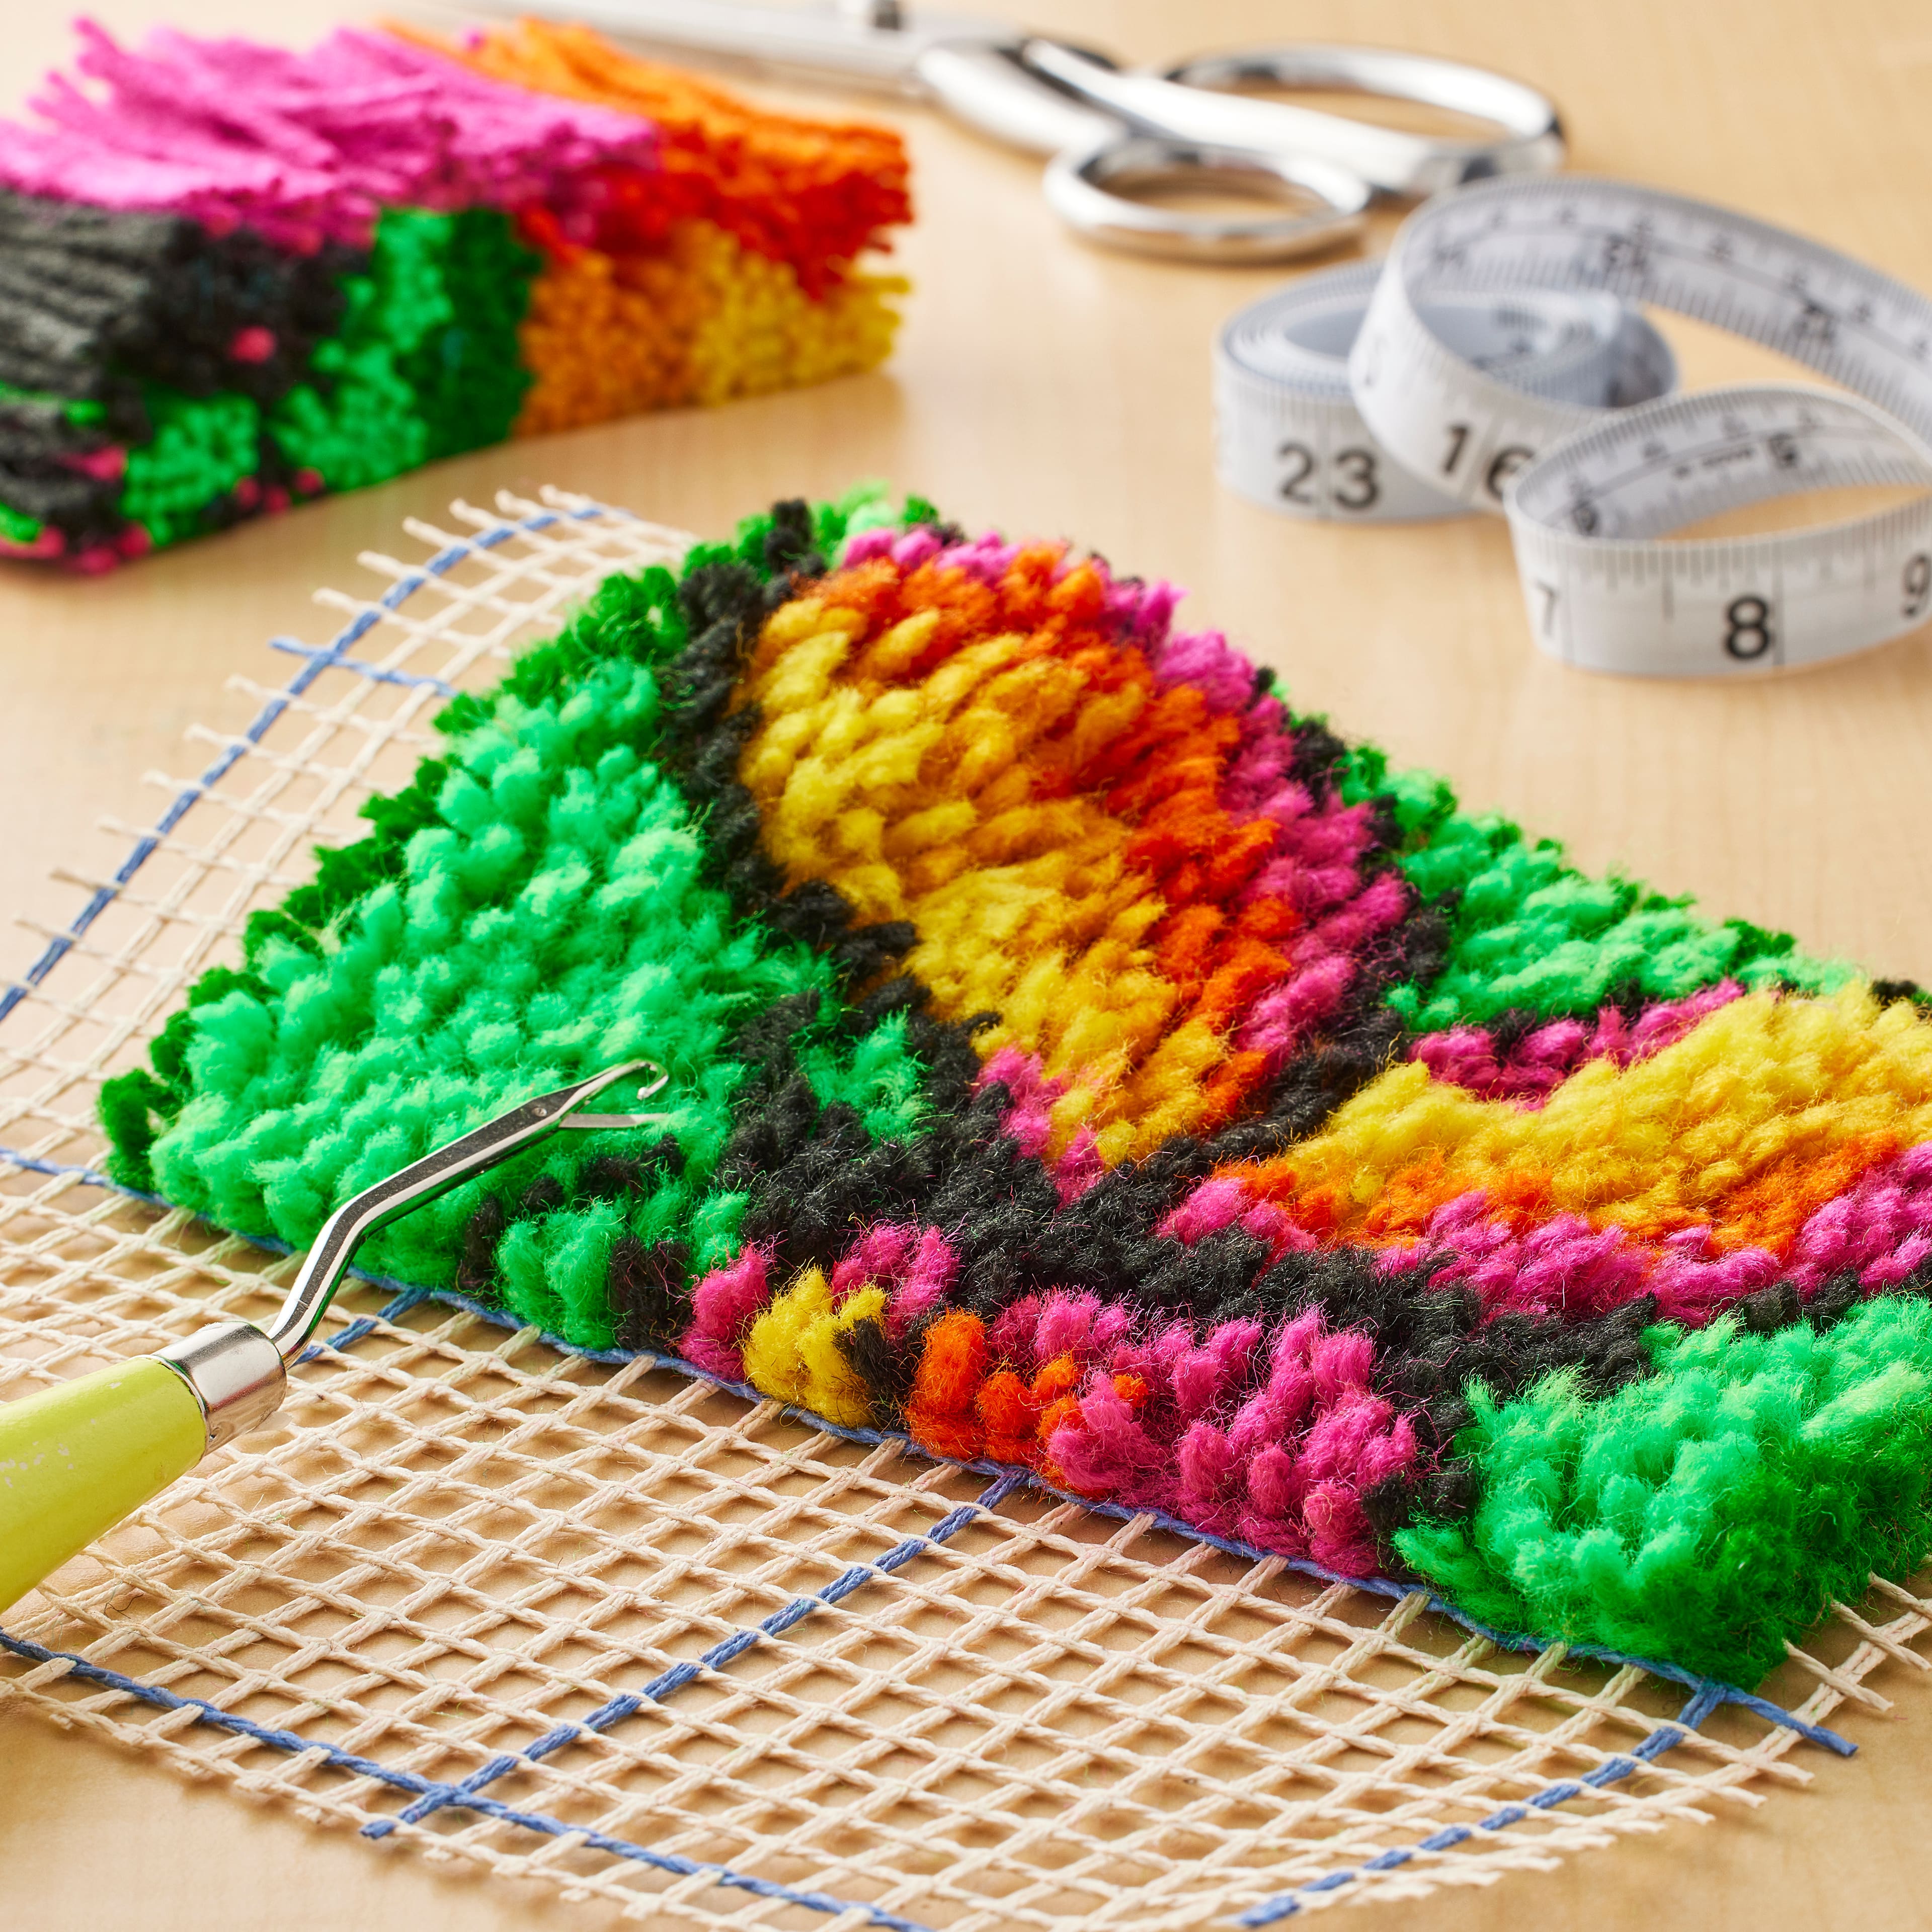 Time to try a new craft? Check out these Cool Latch Hook Kits